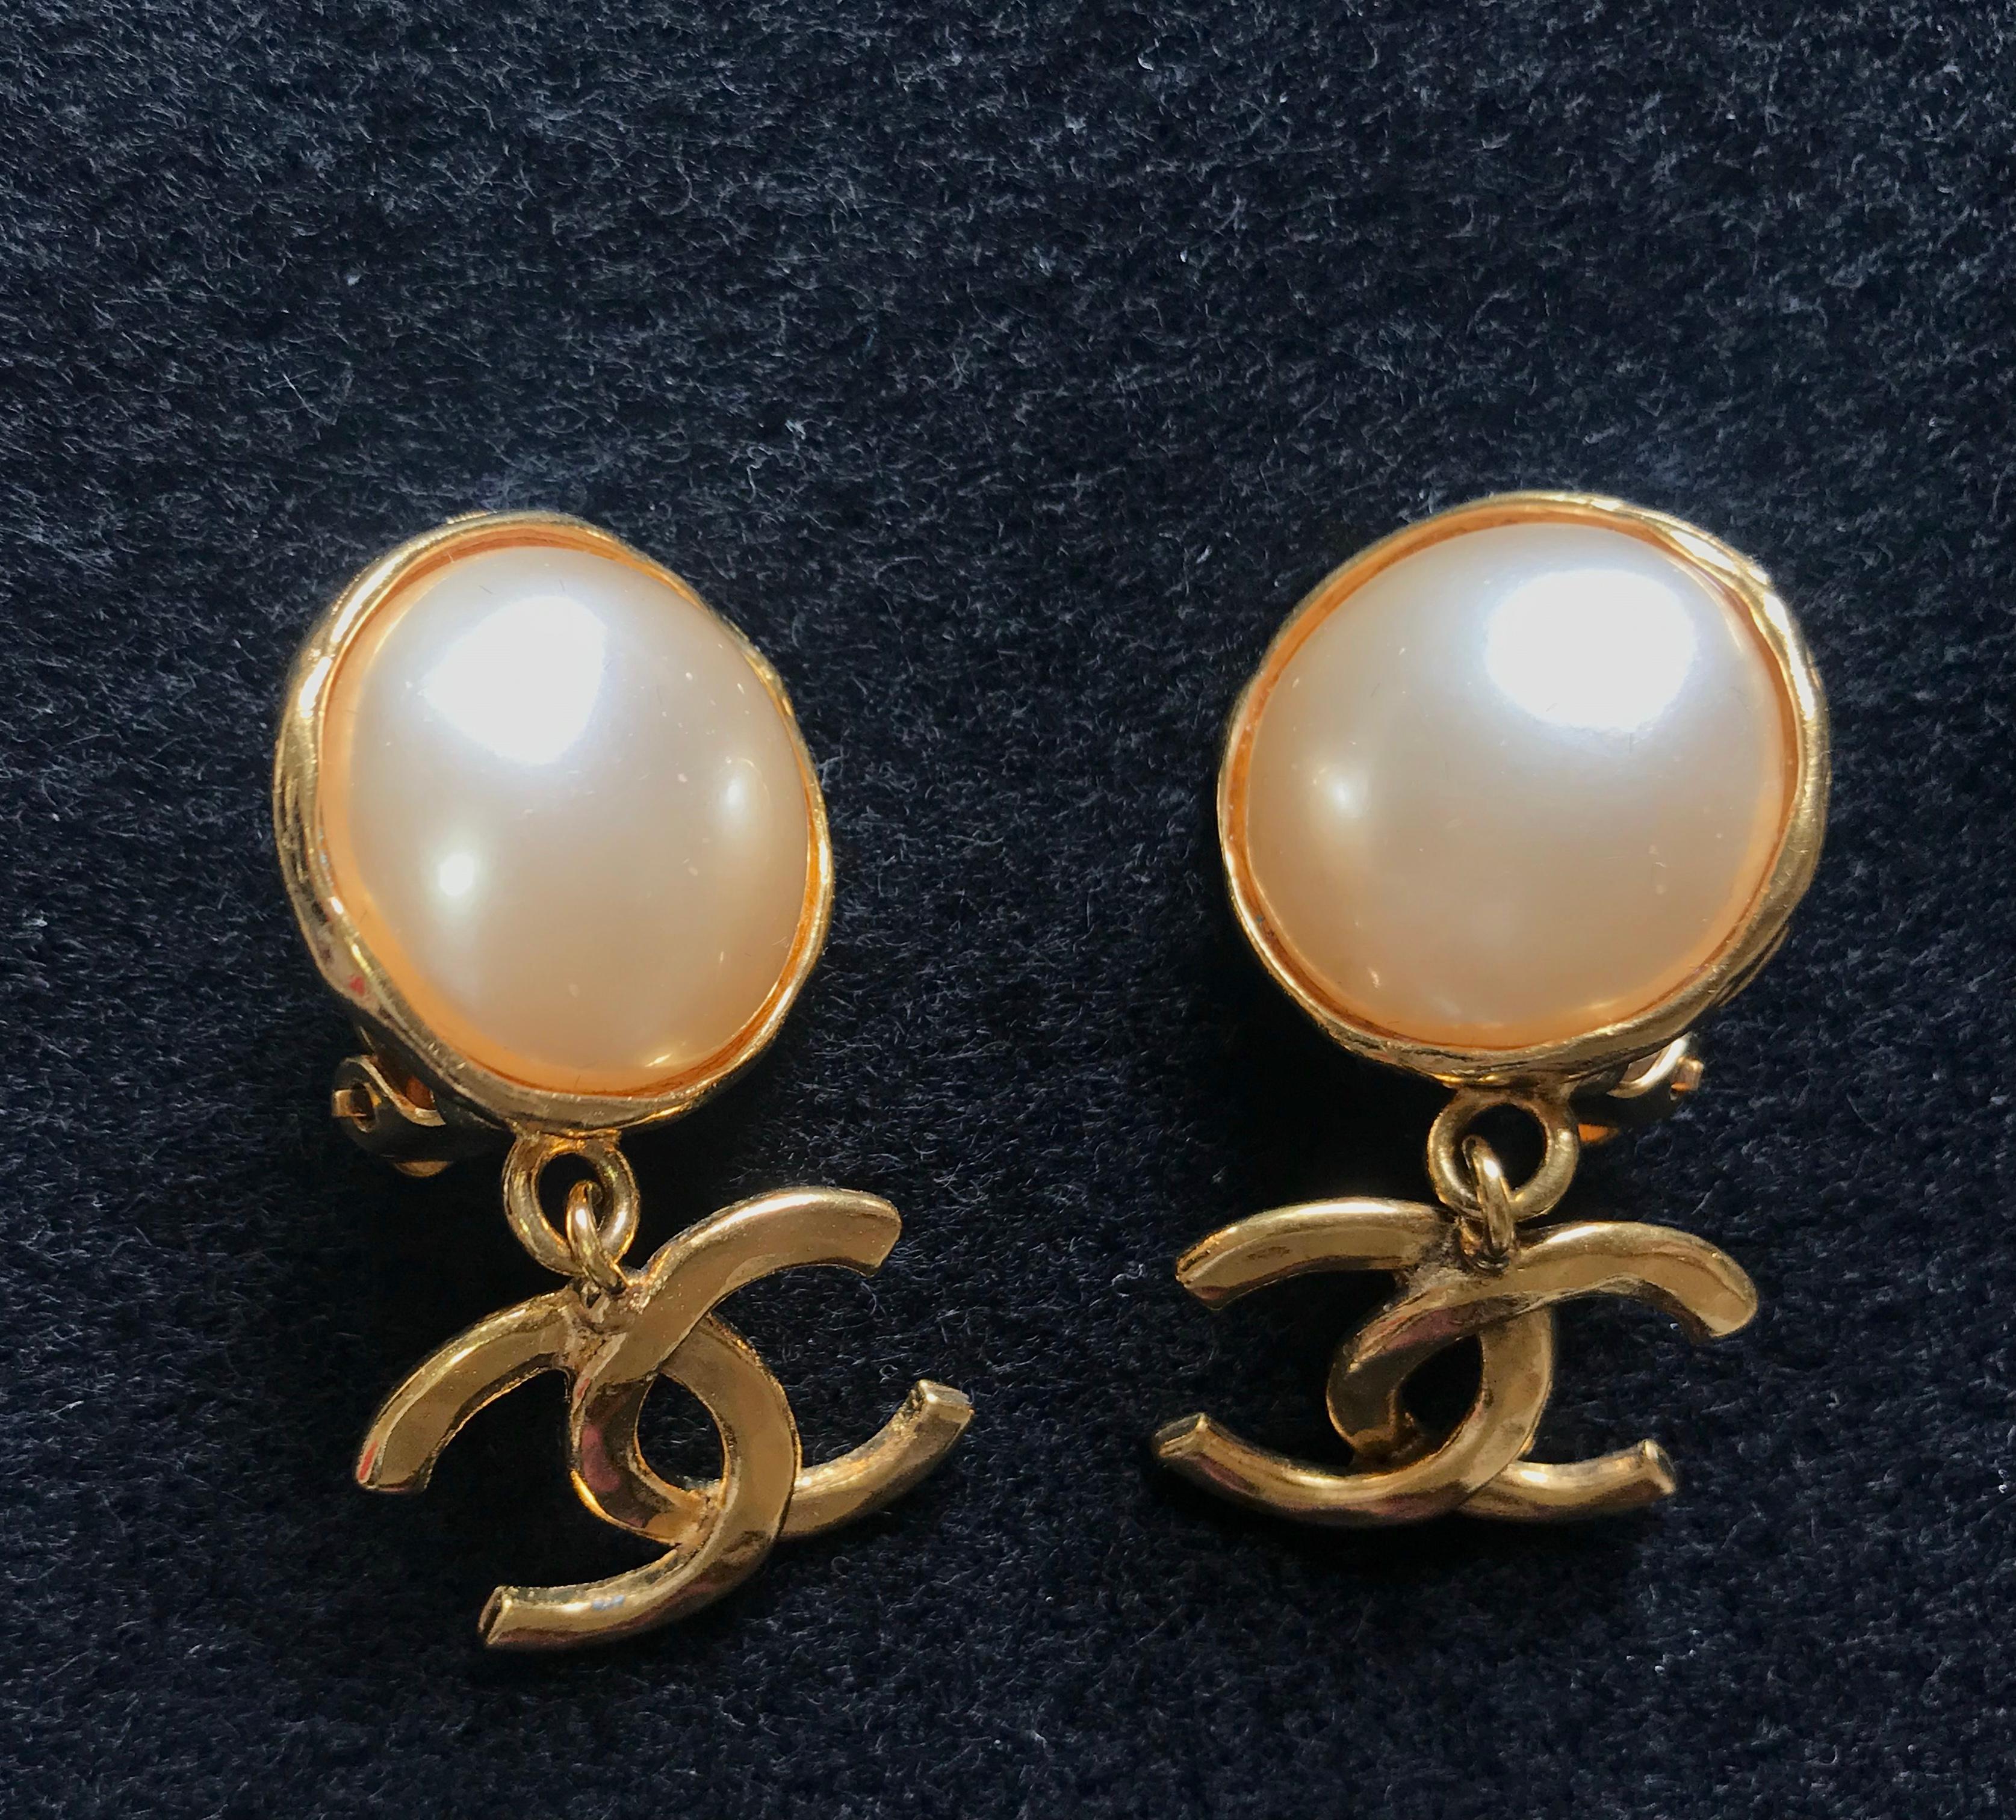 1990s. Vintage CHANEL classic round white faux pearl and golden CC dangling earrings. Iconic CC mark. Hot gift.

Introducing another classic vintage CHANEL jewelry,  white faux pearl earrings with golden CC marks that dangle as you move!
Wearing